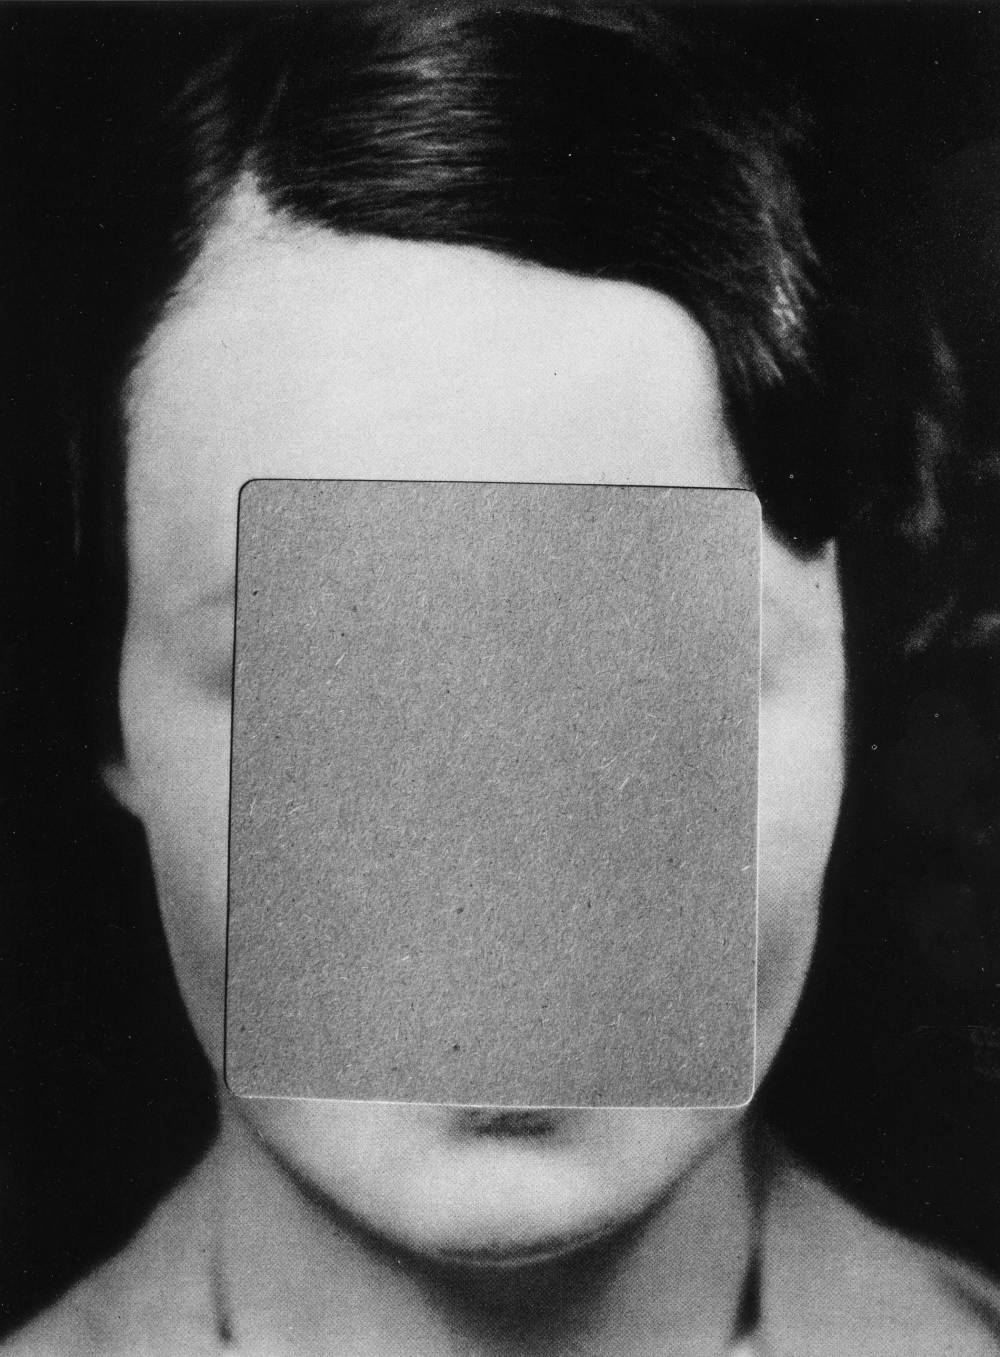 Close up black and white image of a woman's face with the majority of the facial features cut away in the shape of a rectangle that is filled with a second gray image.